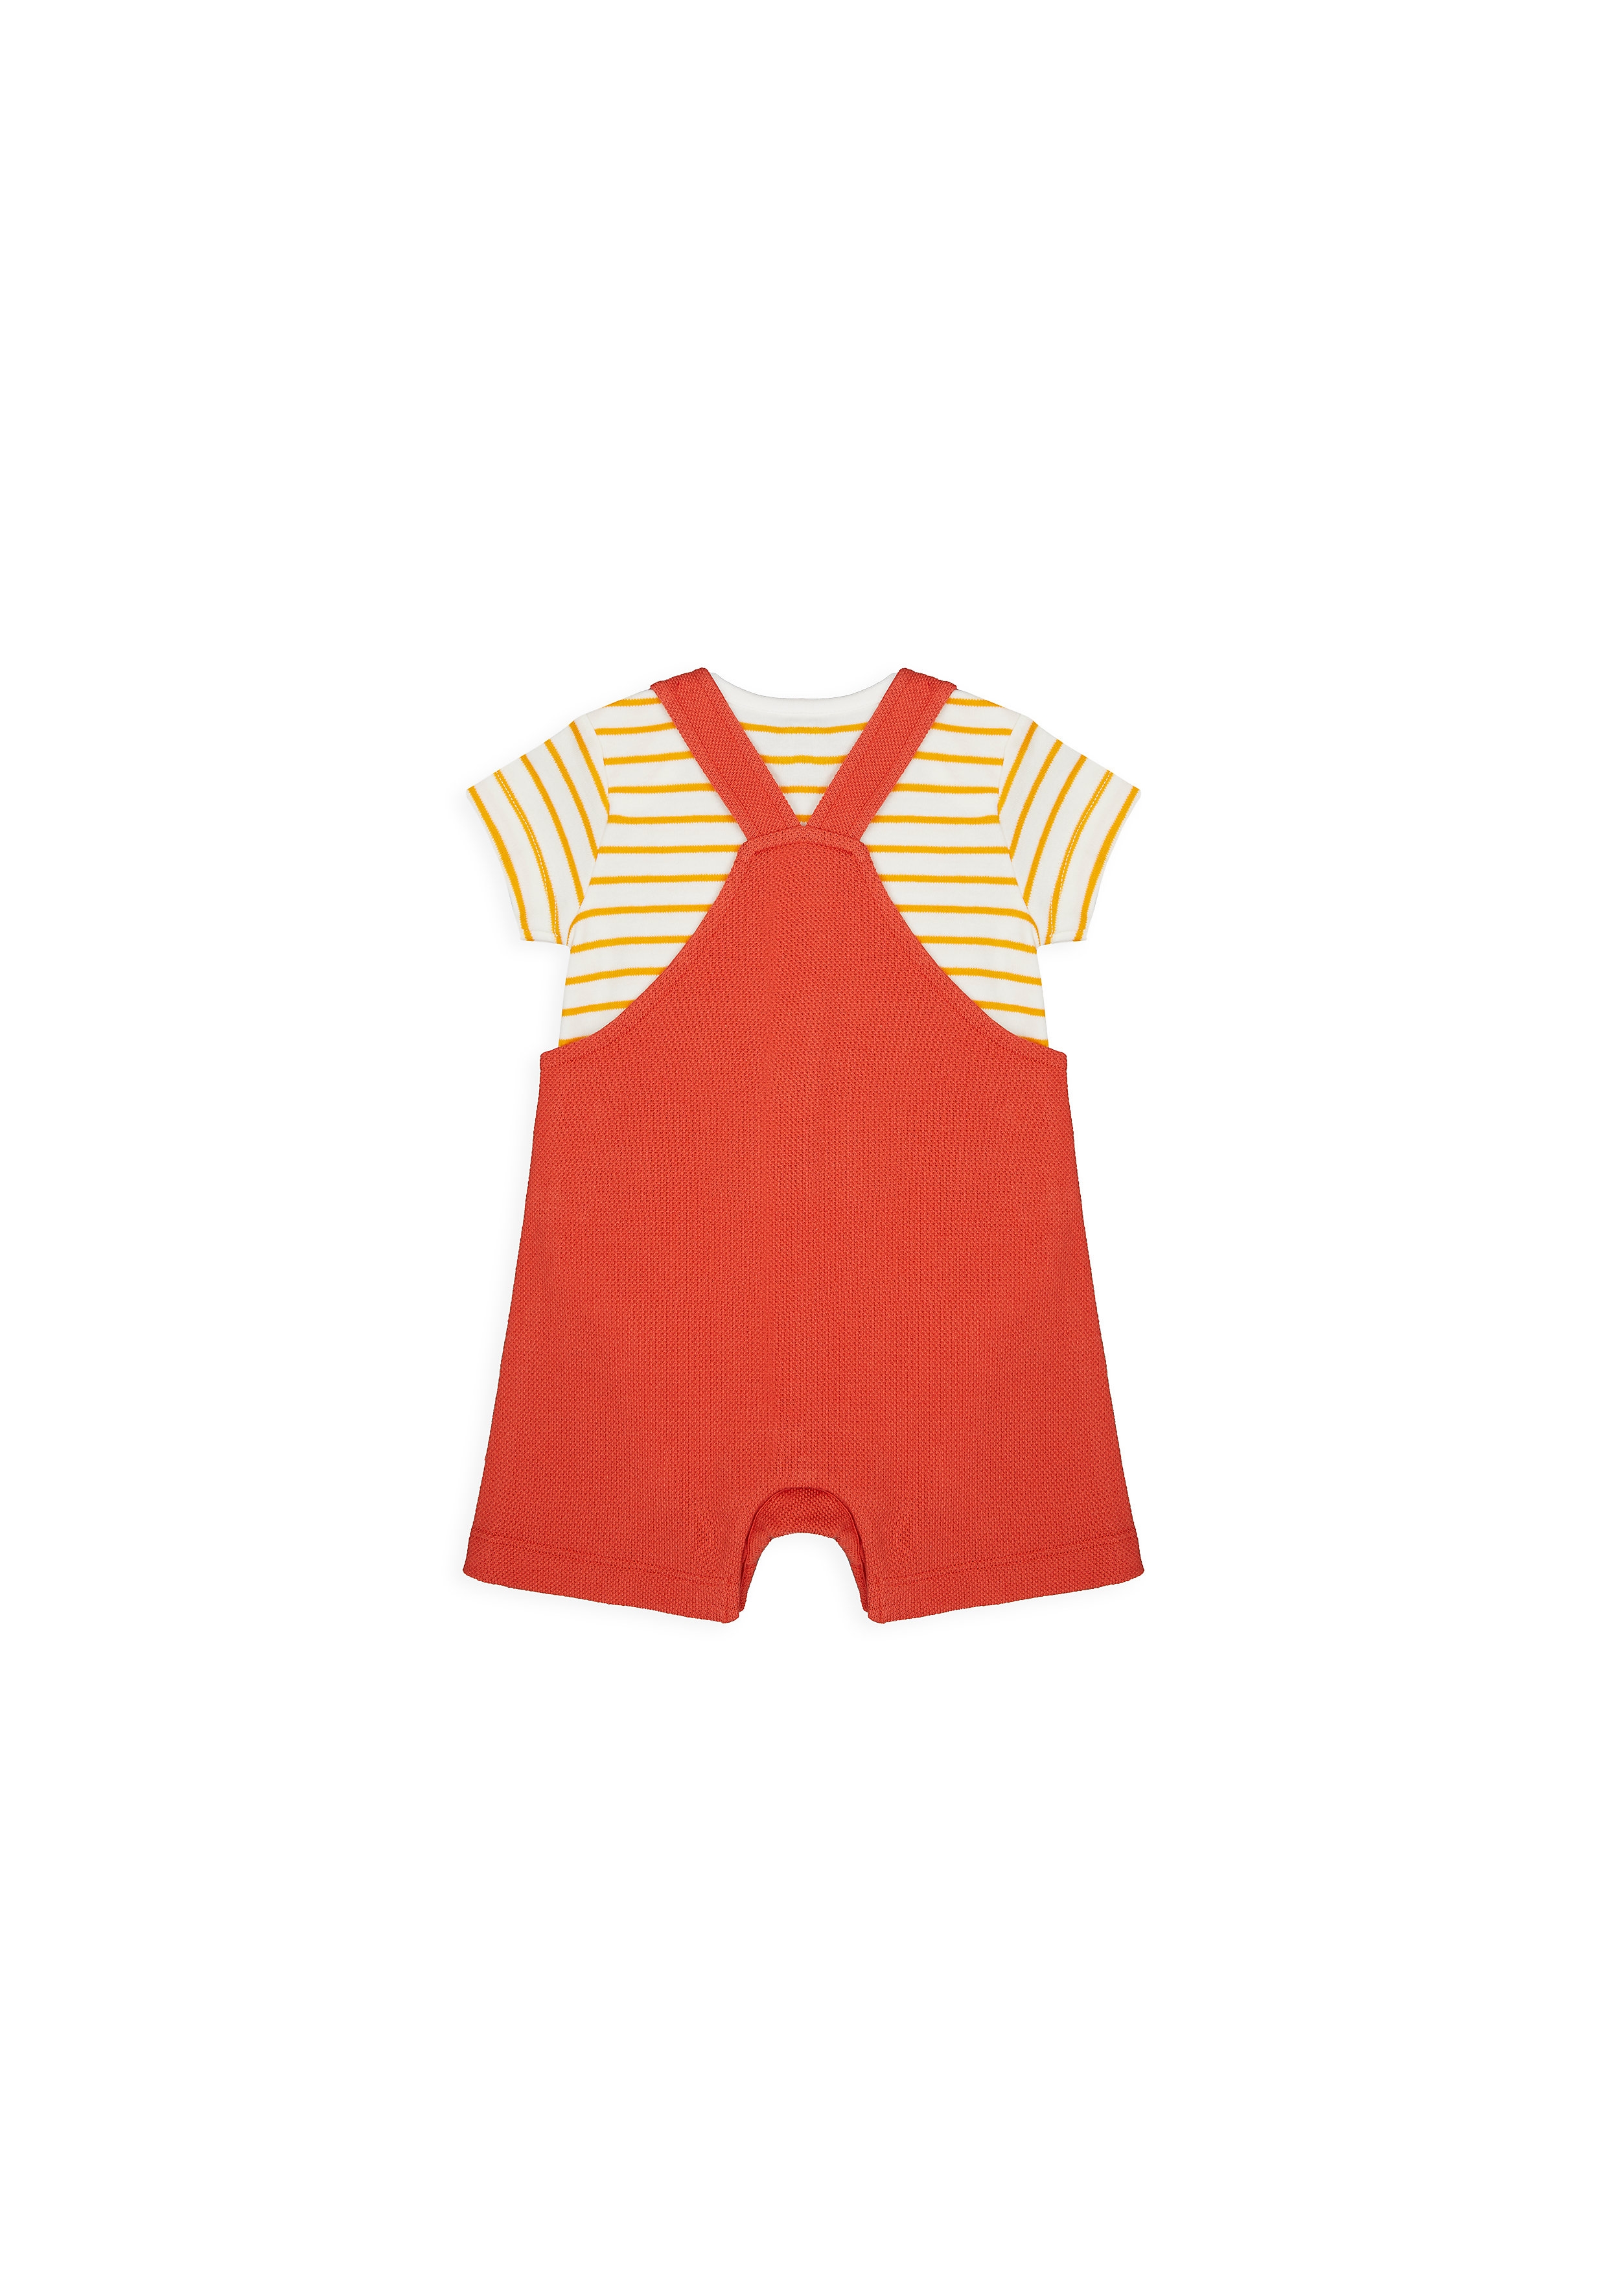 Mothercare | Boys Half Sleeves Dungaree Set Dino Embroidery - Red 1